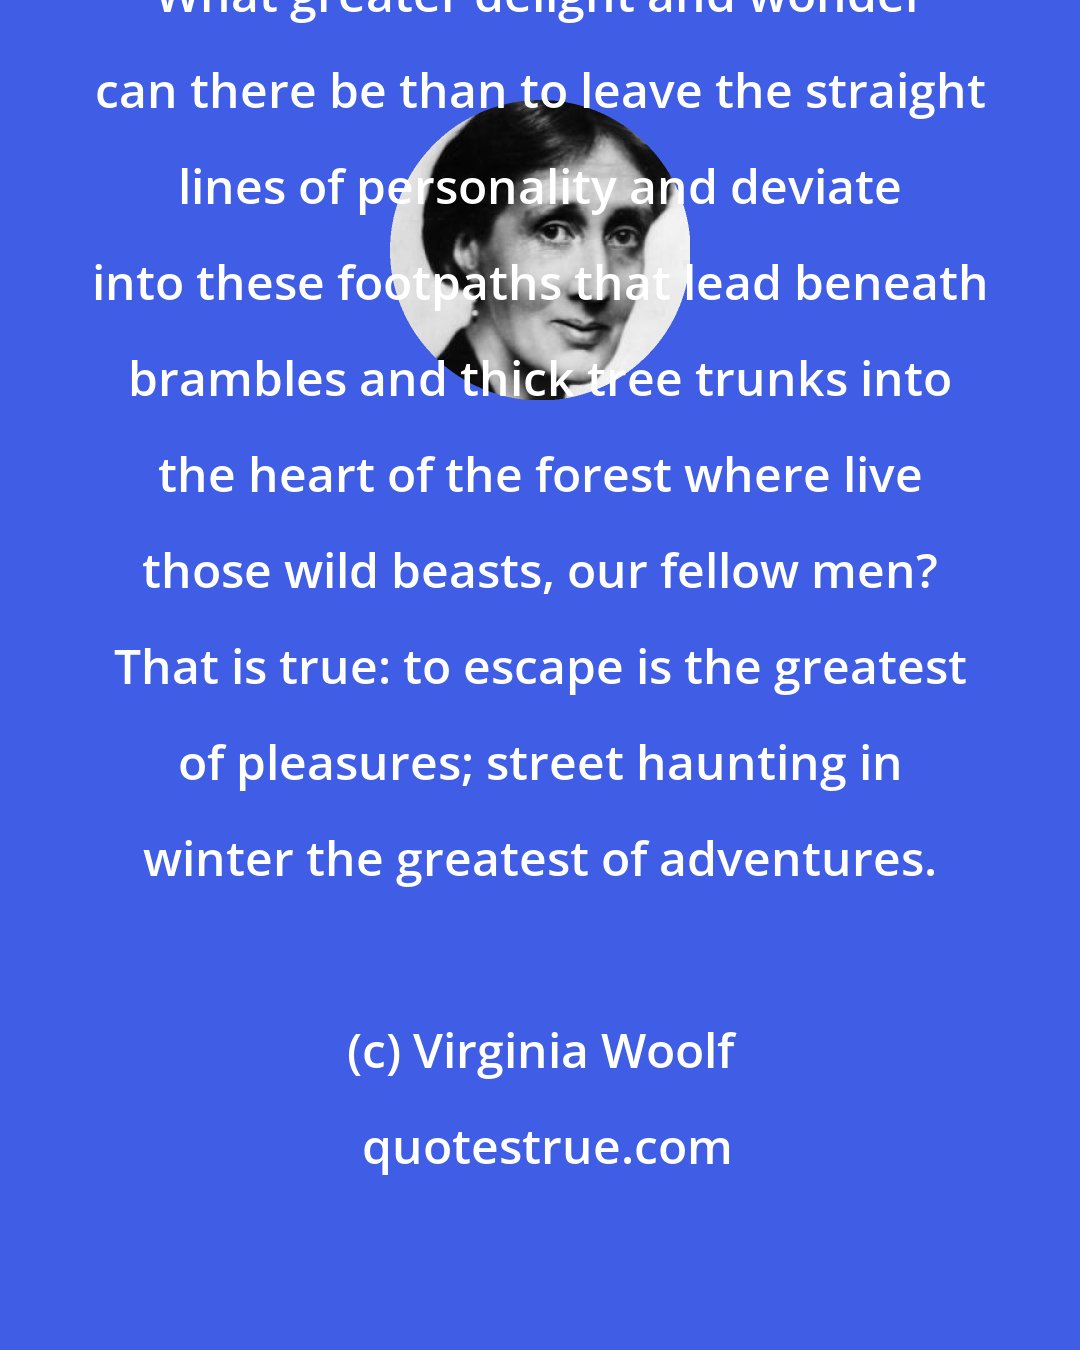 Virginia Woolf: What greater delight and wonder can there be than to leave the straight lines of personality and deviate into these footpaths that lead beneath brambles and thick tree trunks into the heart of the forest where live those wild beasts, our fellow men? That is true: to escape is the greatest of pleasures; street haunting in winter the greatest of adventures.